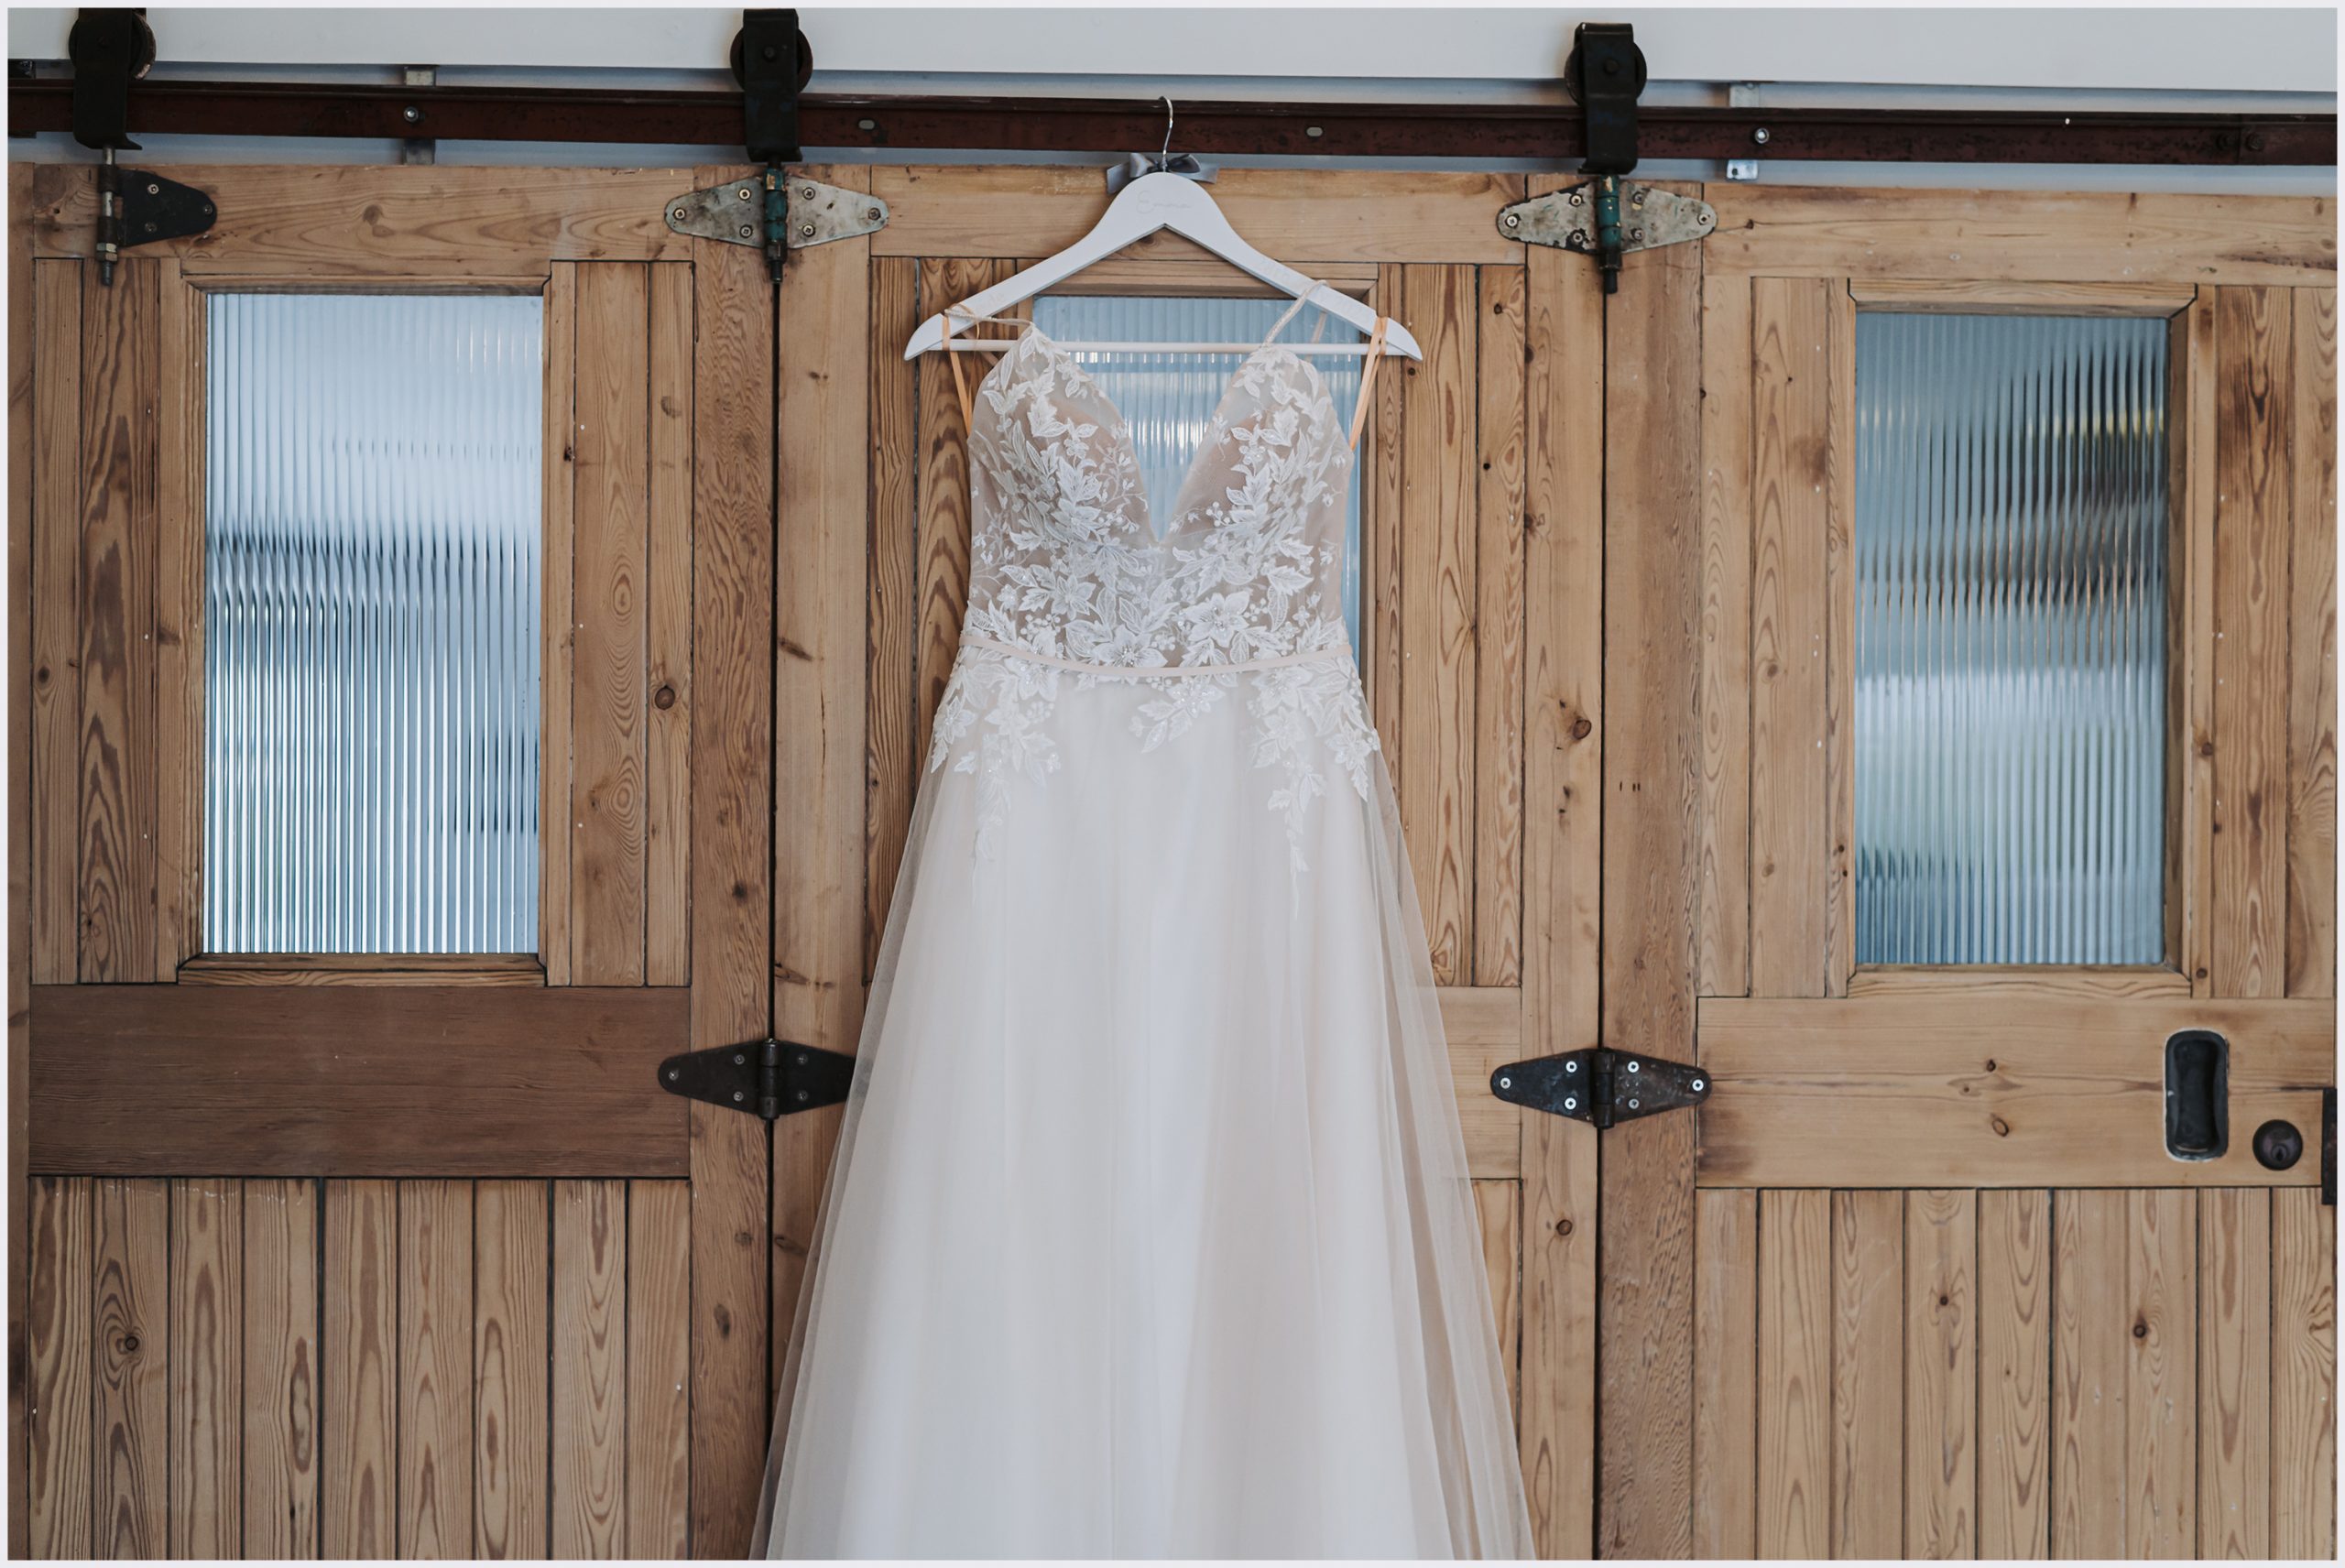 Bride's stunning lace wedding dress with a long train hanging on the rustic stable doors of a converted barn taken by Cheshire wedding photographer Helena Jayne Photography